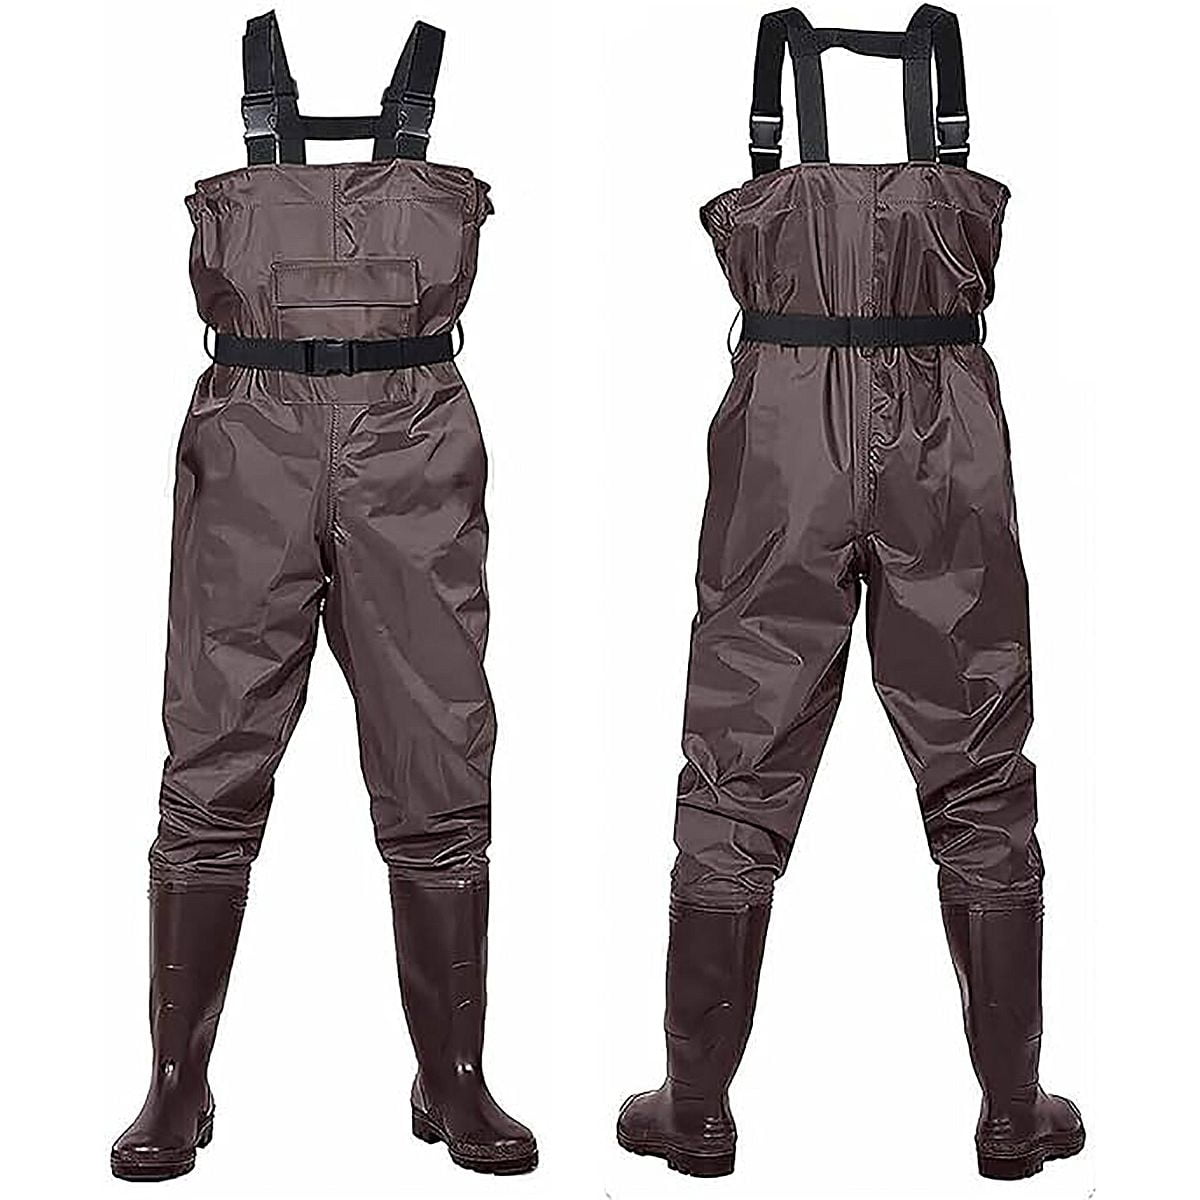  8 Fans Breathable Chest Wader for Men & Women Stocking Foot  3-Ply 100% Durable and Waterproof Insulated Fishing Chest Waders for Fly  Fishing,Duck Hunting, Kayaking (Khaki X-Small) : Sports & Outdoors